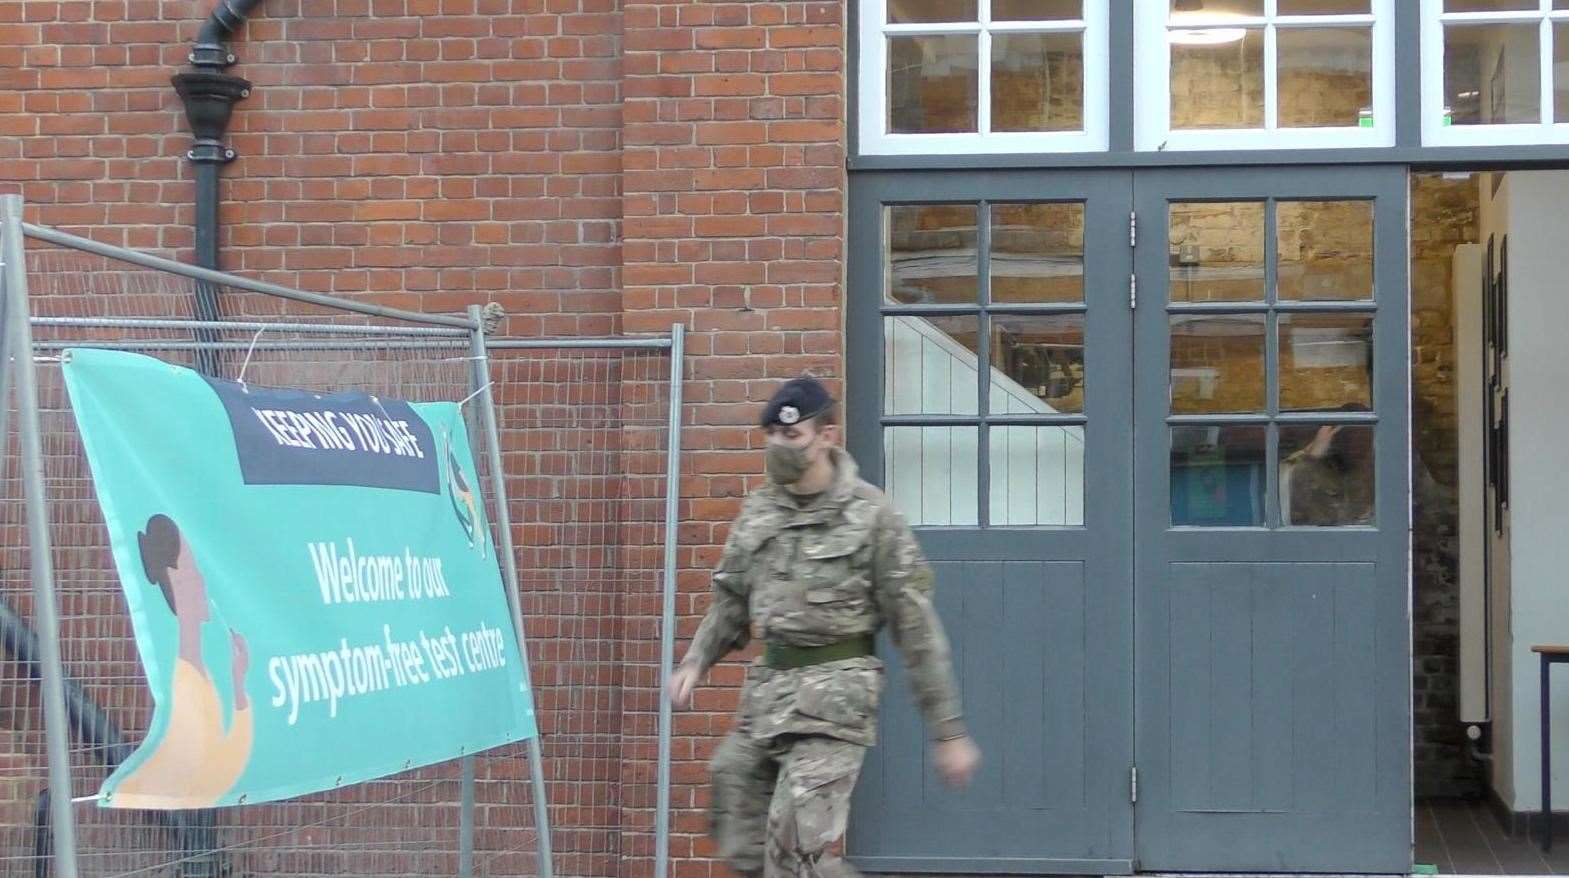 The military has been setting up a Covid-19 testing site at the university campus in Medway